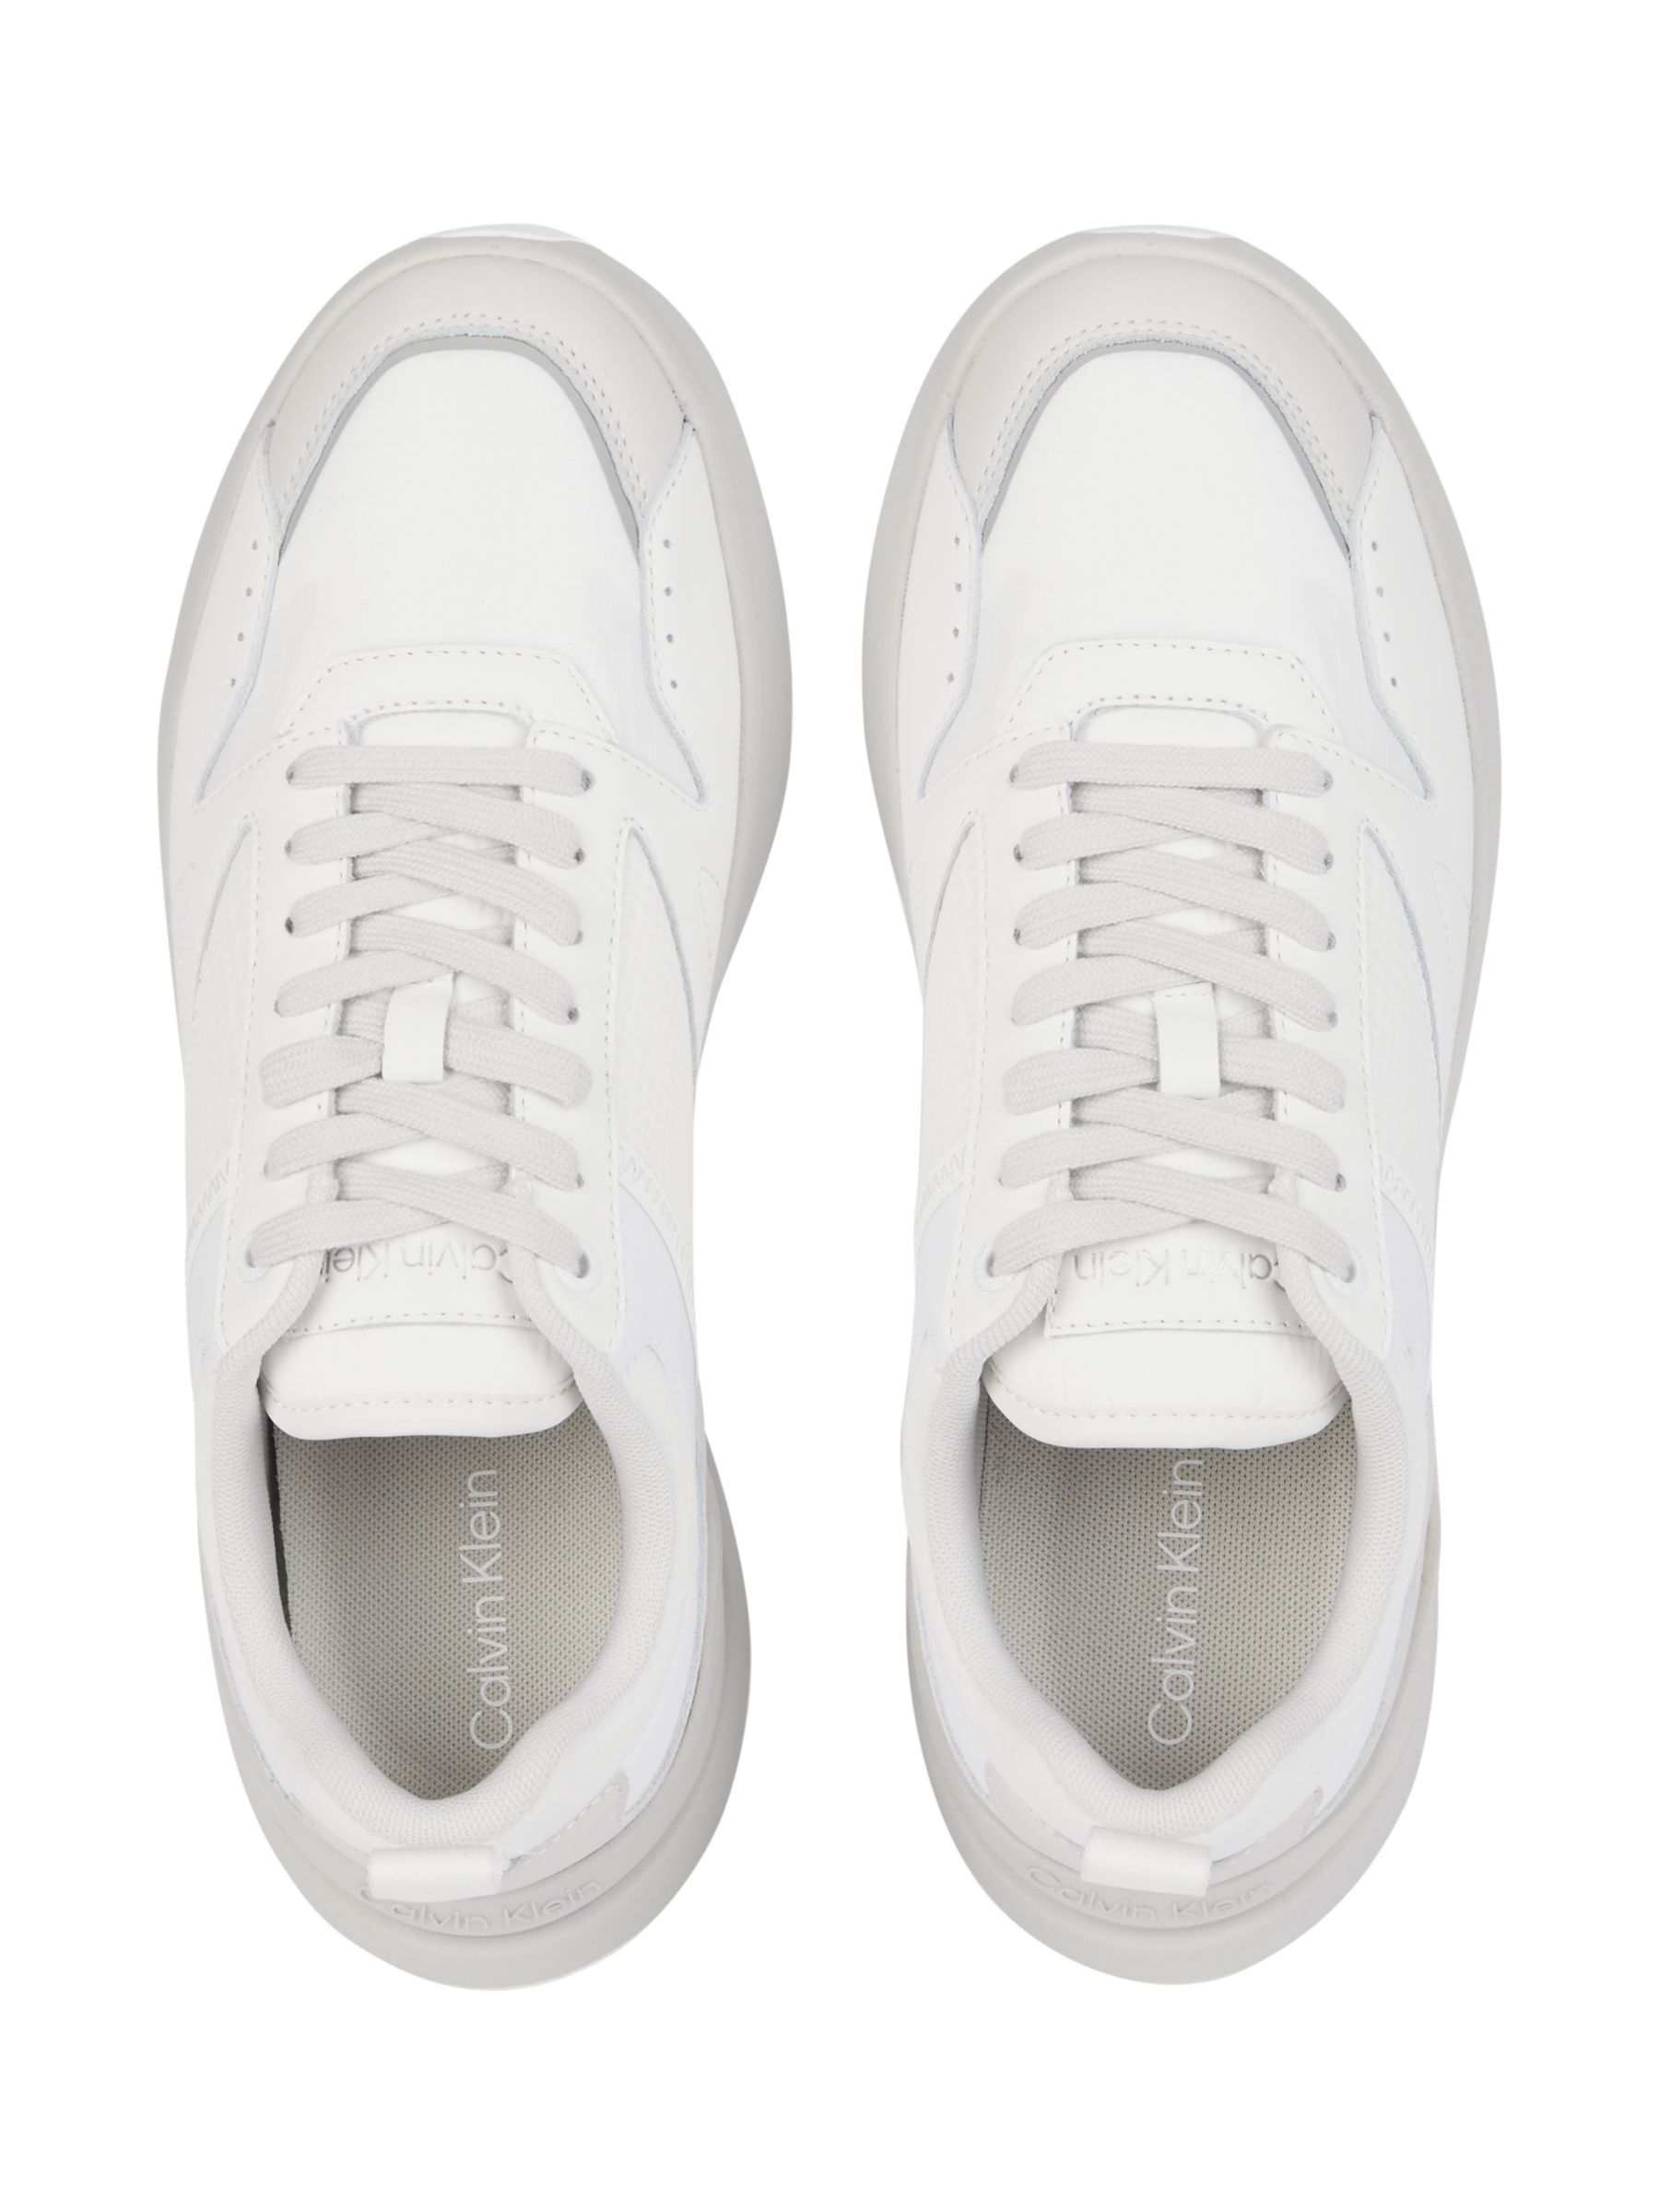 Calvin Klein Leather Low Top Chunky Heel Trainers, White/Light Grey, 9